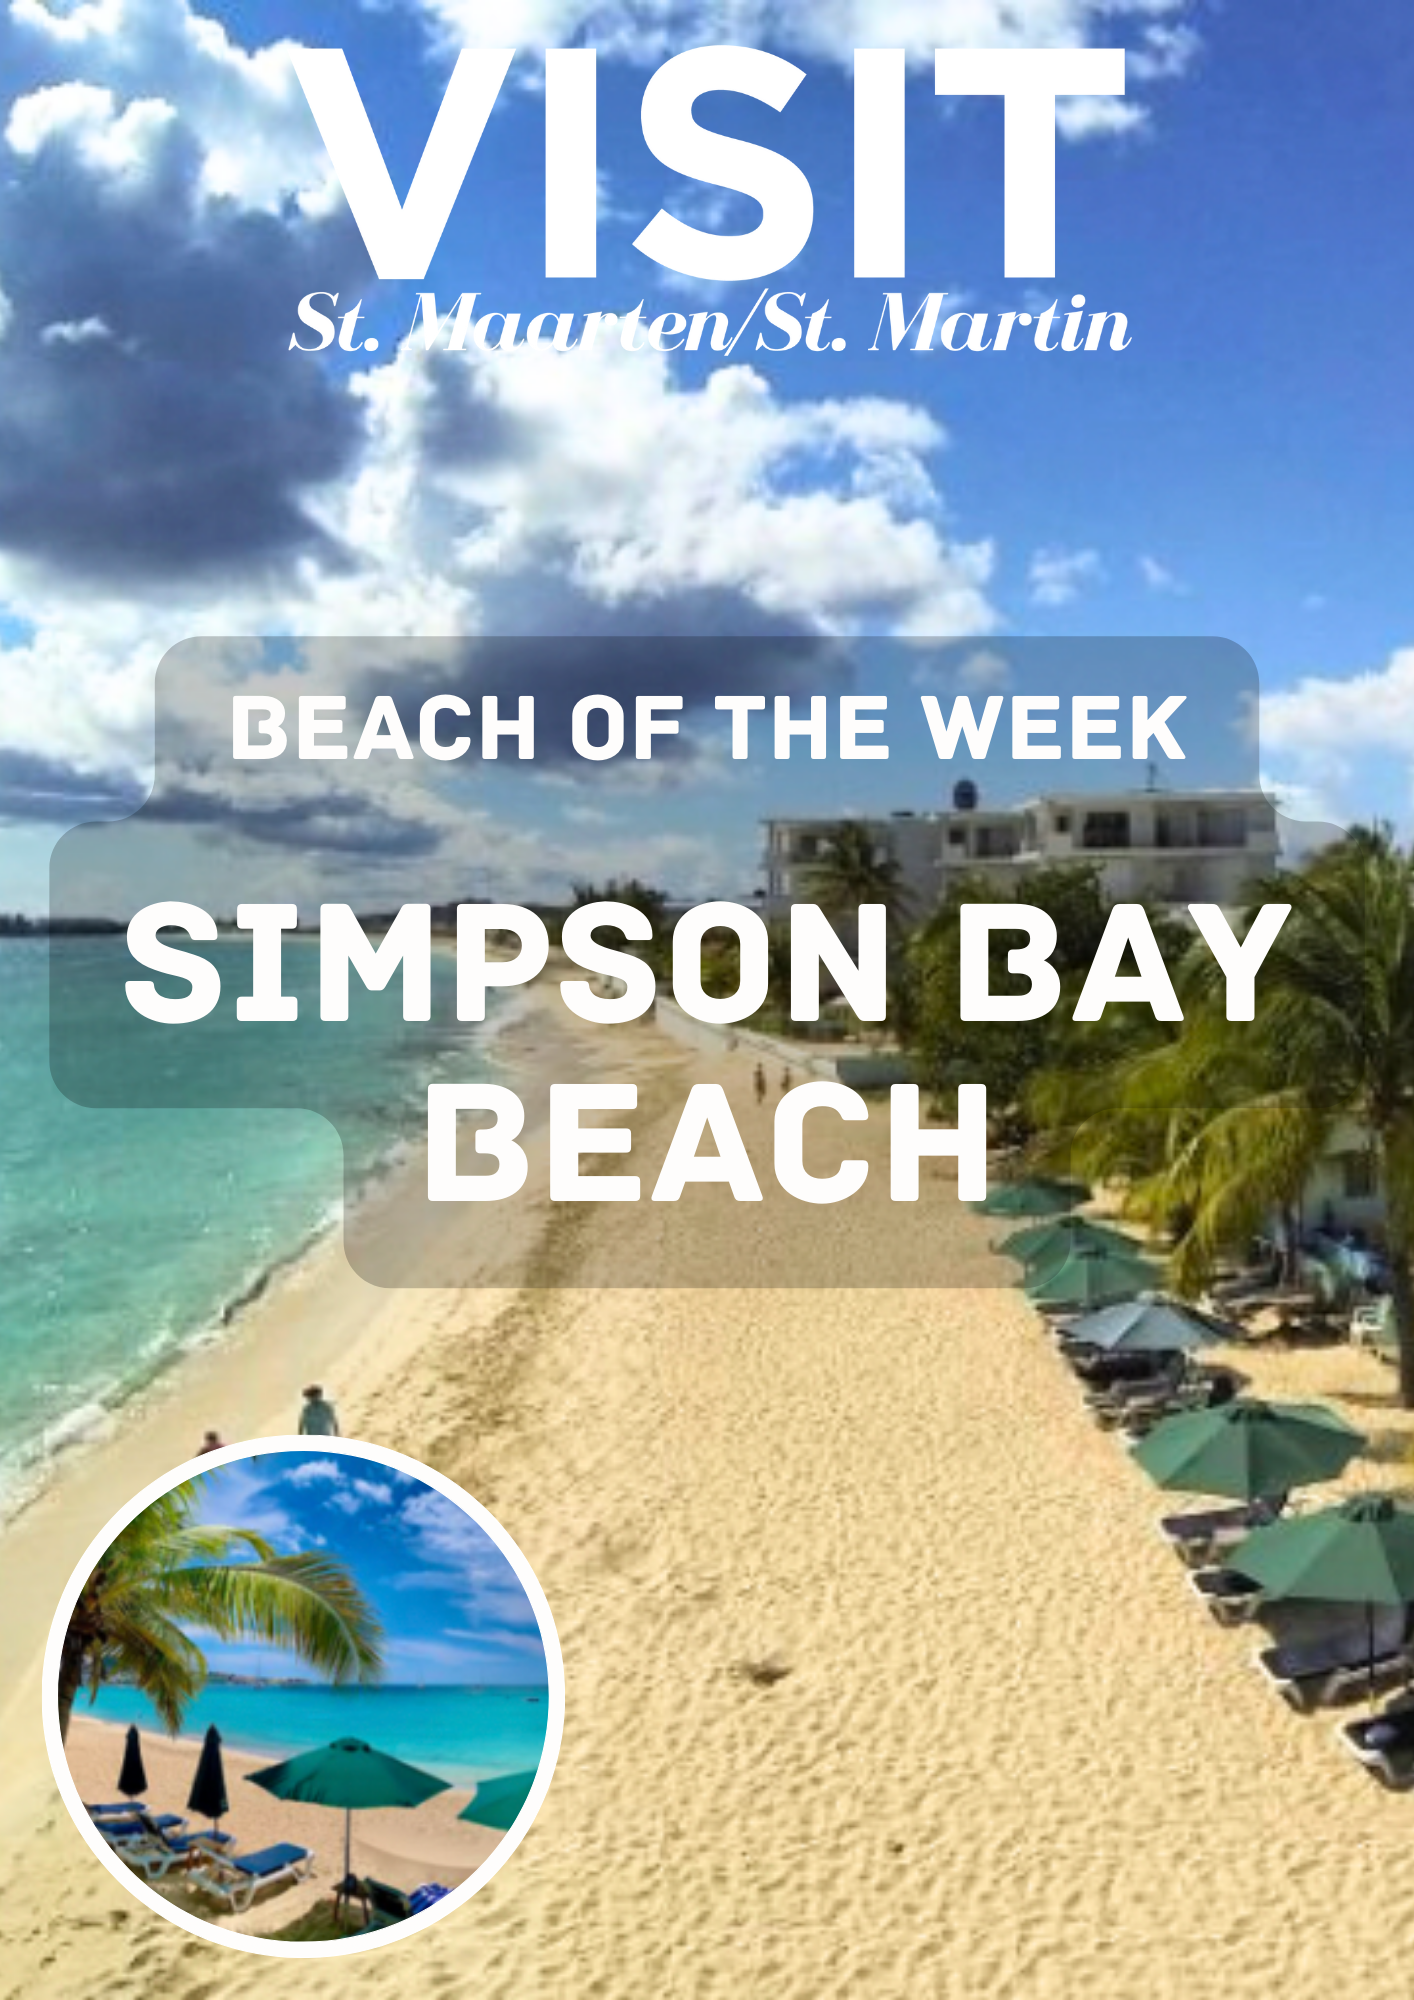 The St Maarten beach of the week is Simpson Bay Beach which is on the south side of the Caribbean island